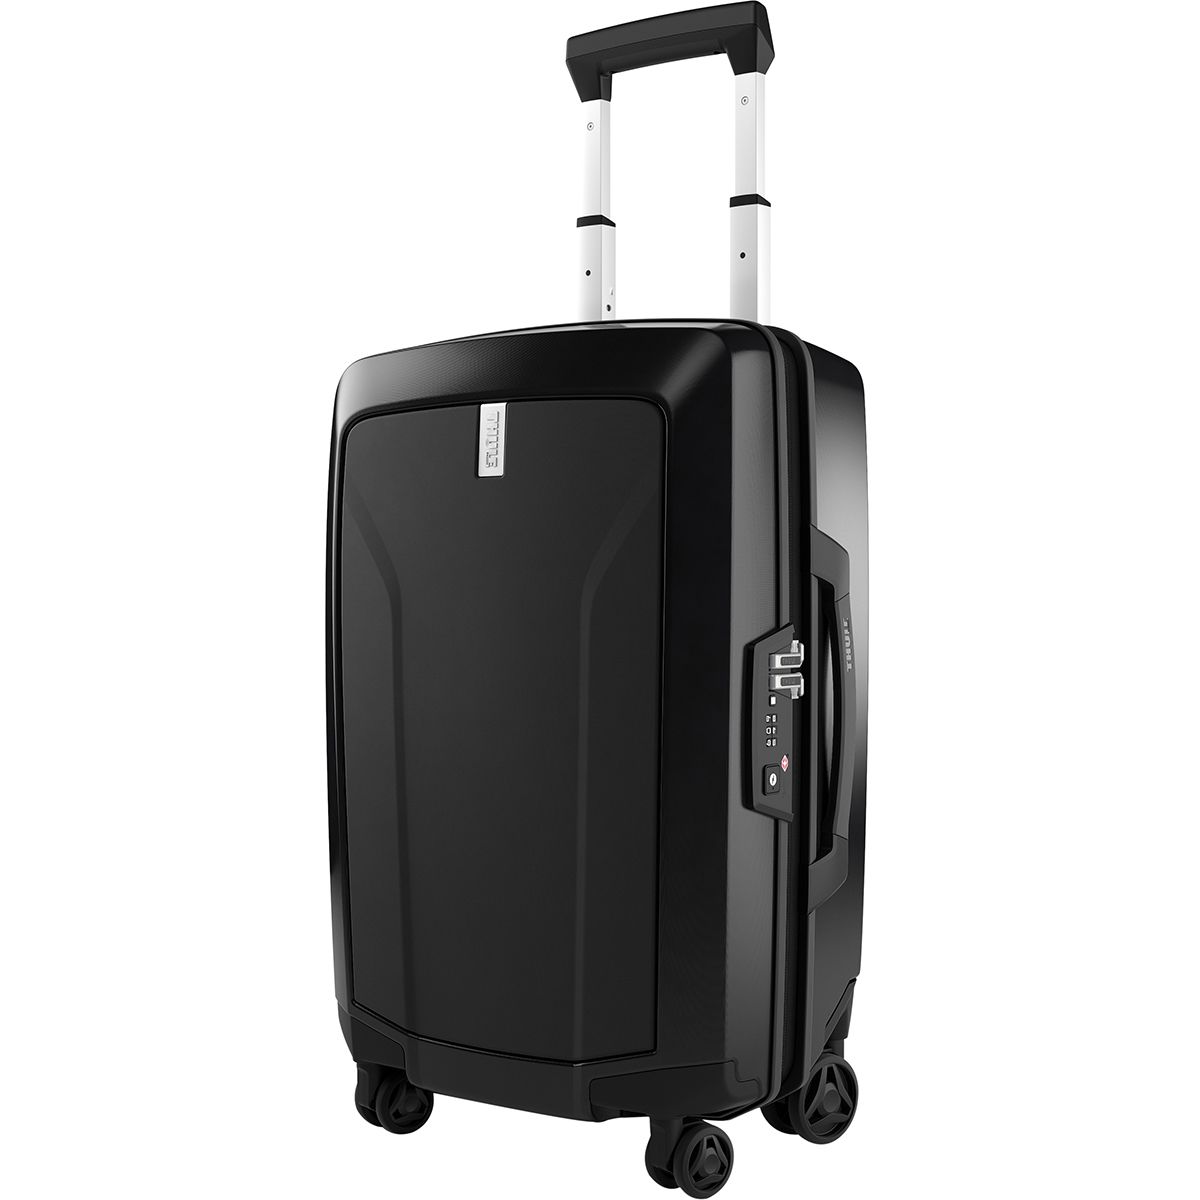 Thule Revolve 22in Global Carry-On Bag